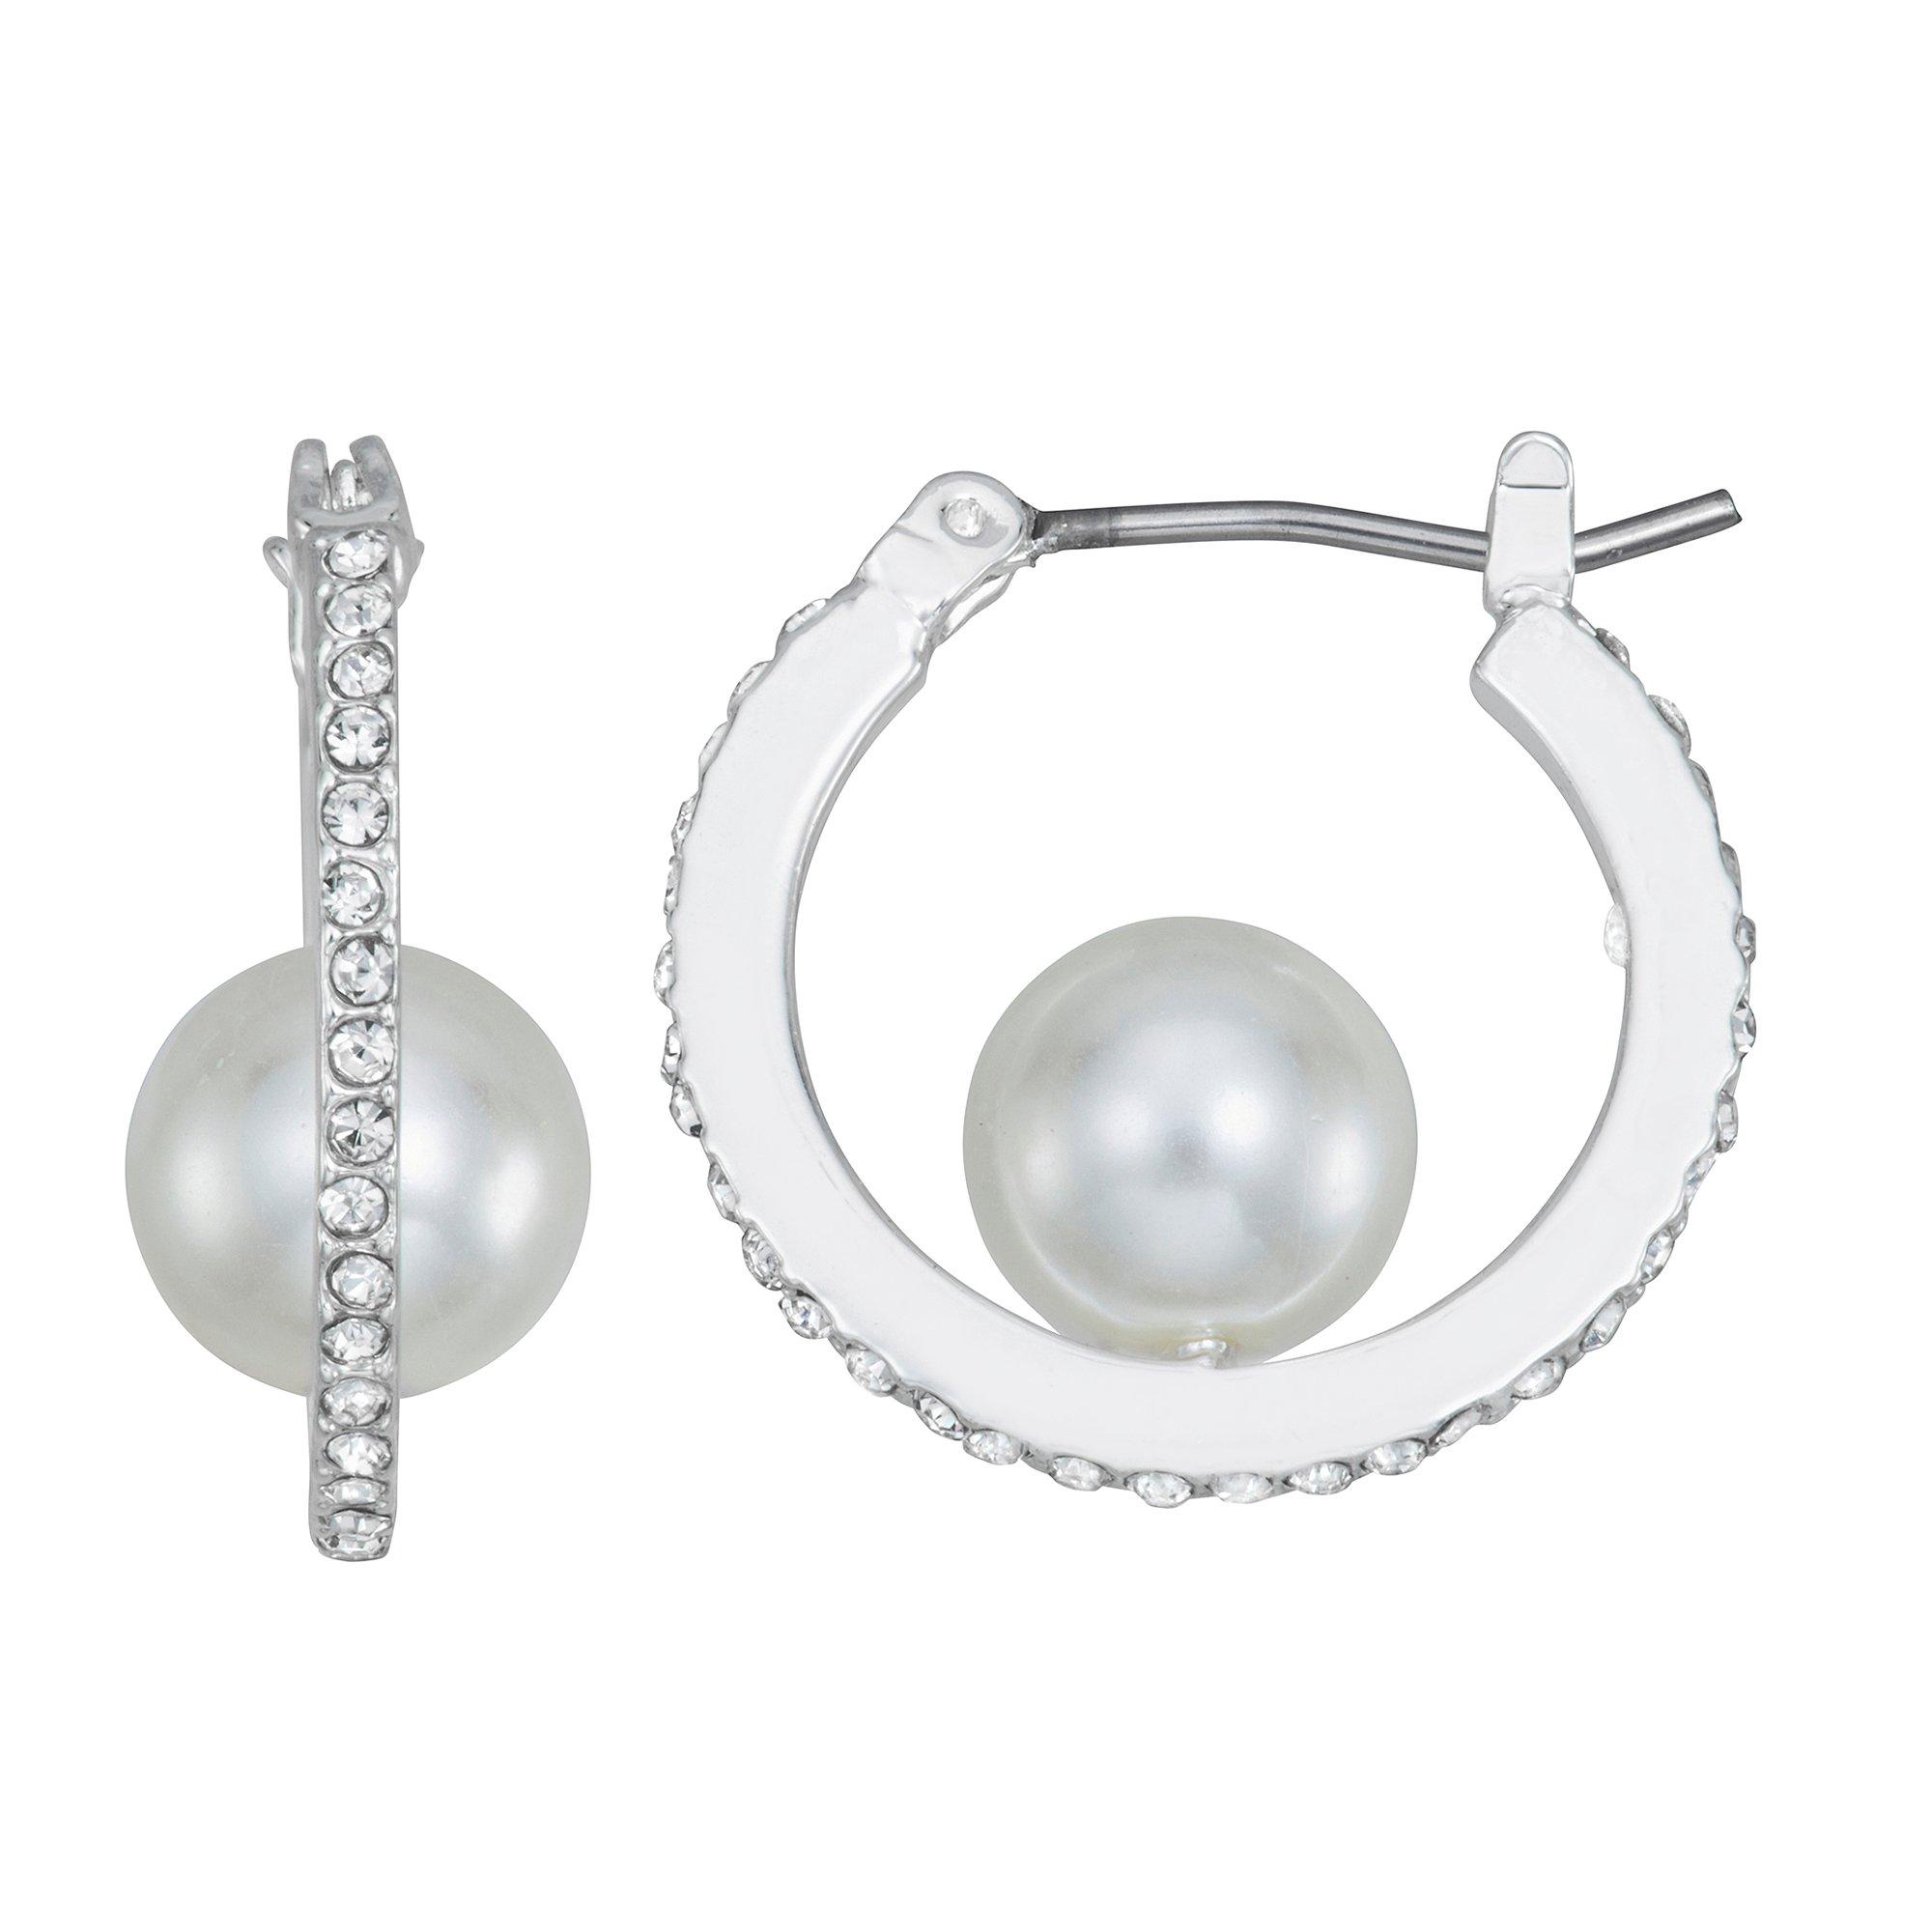 You're Invited Silver Tone Faux Pearl Earrings